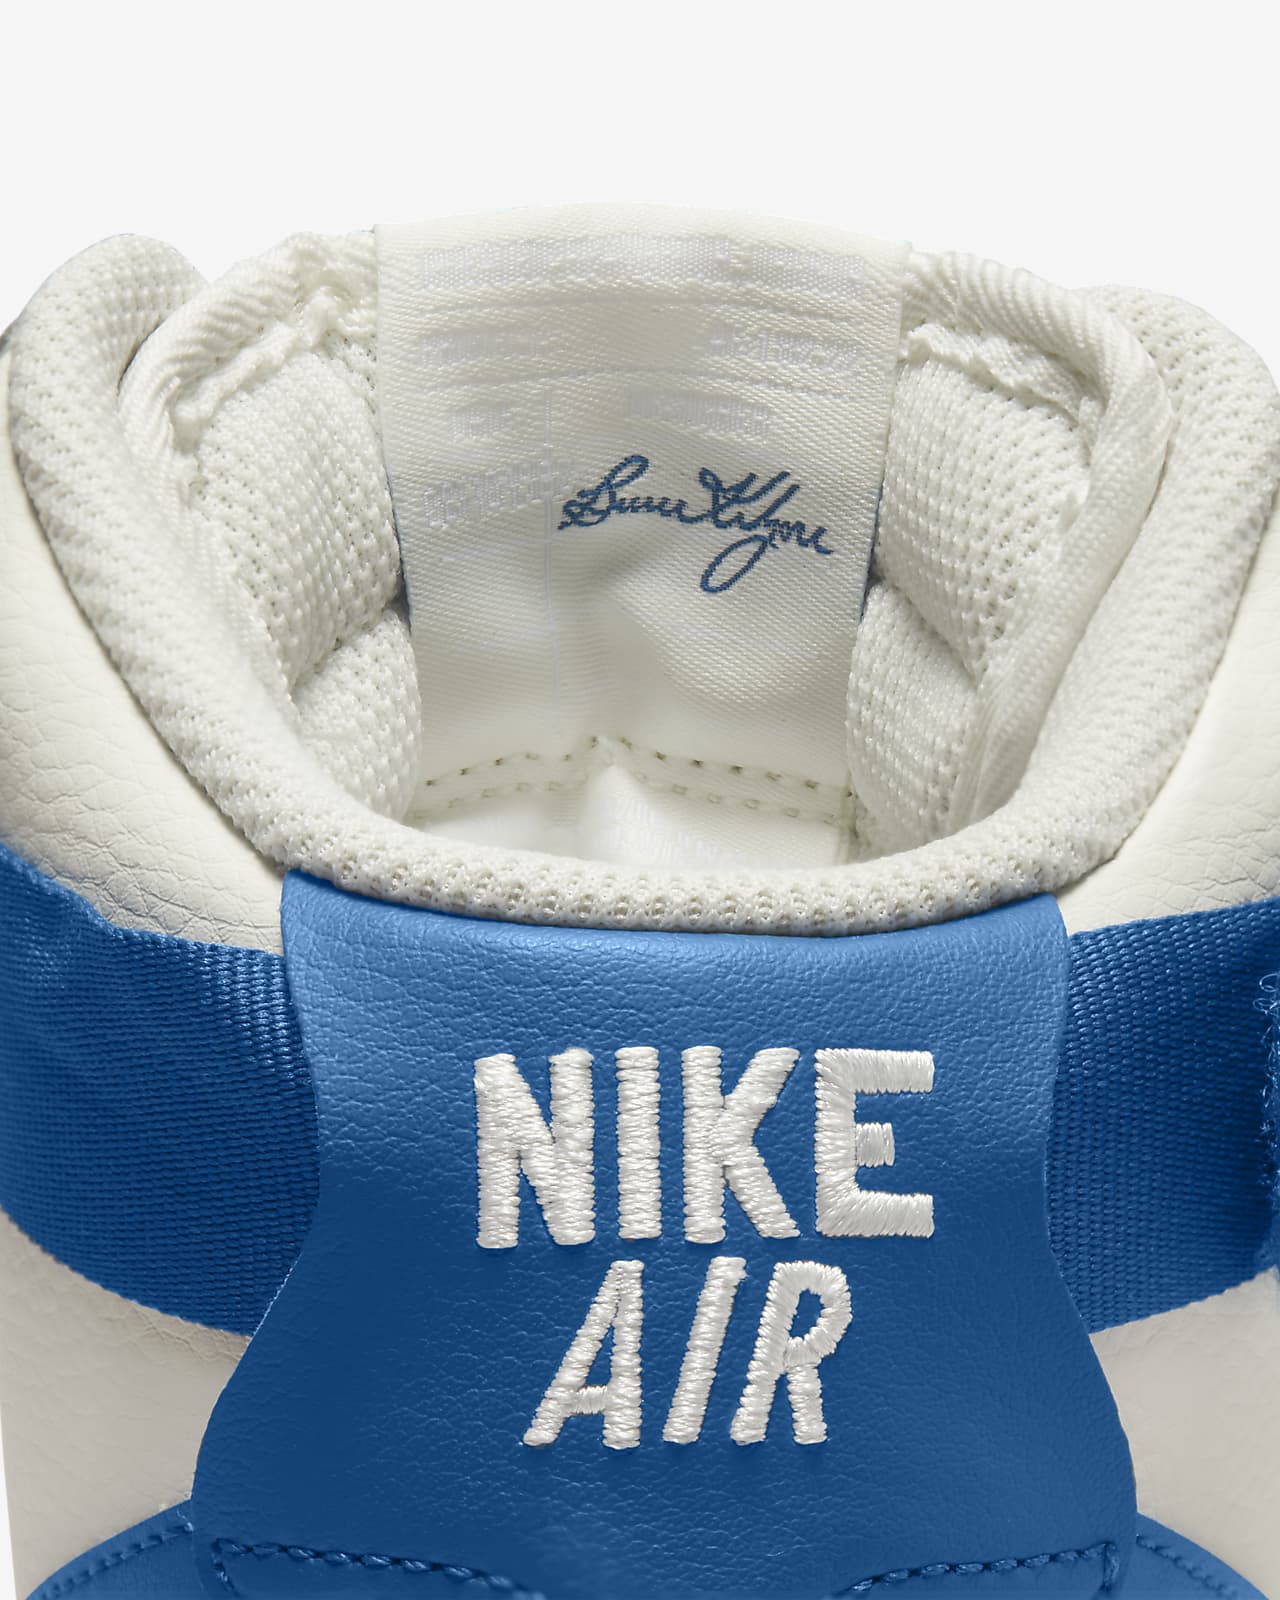 Nike Air Force 1 '07 LV8 '82 - Blue Chill' | White | Men's Size 6